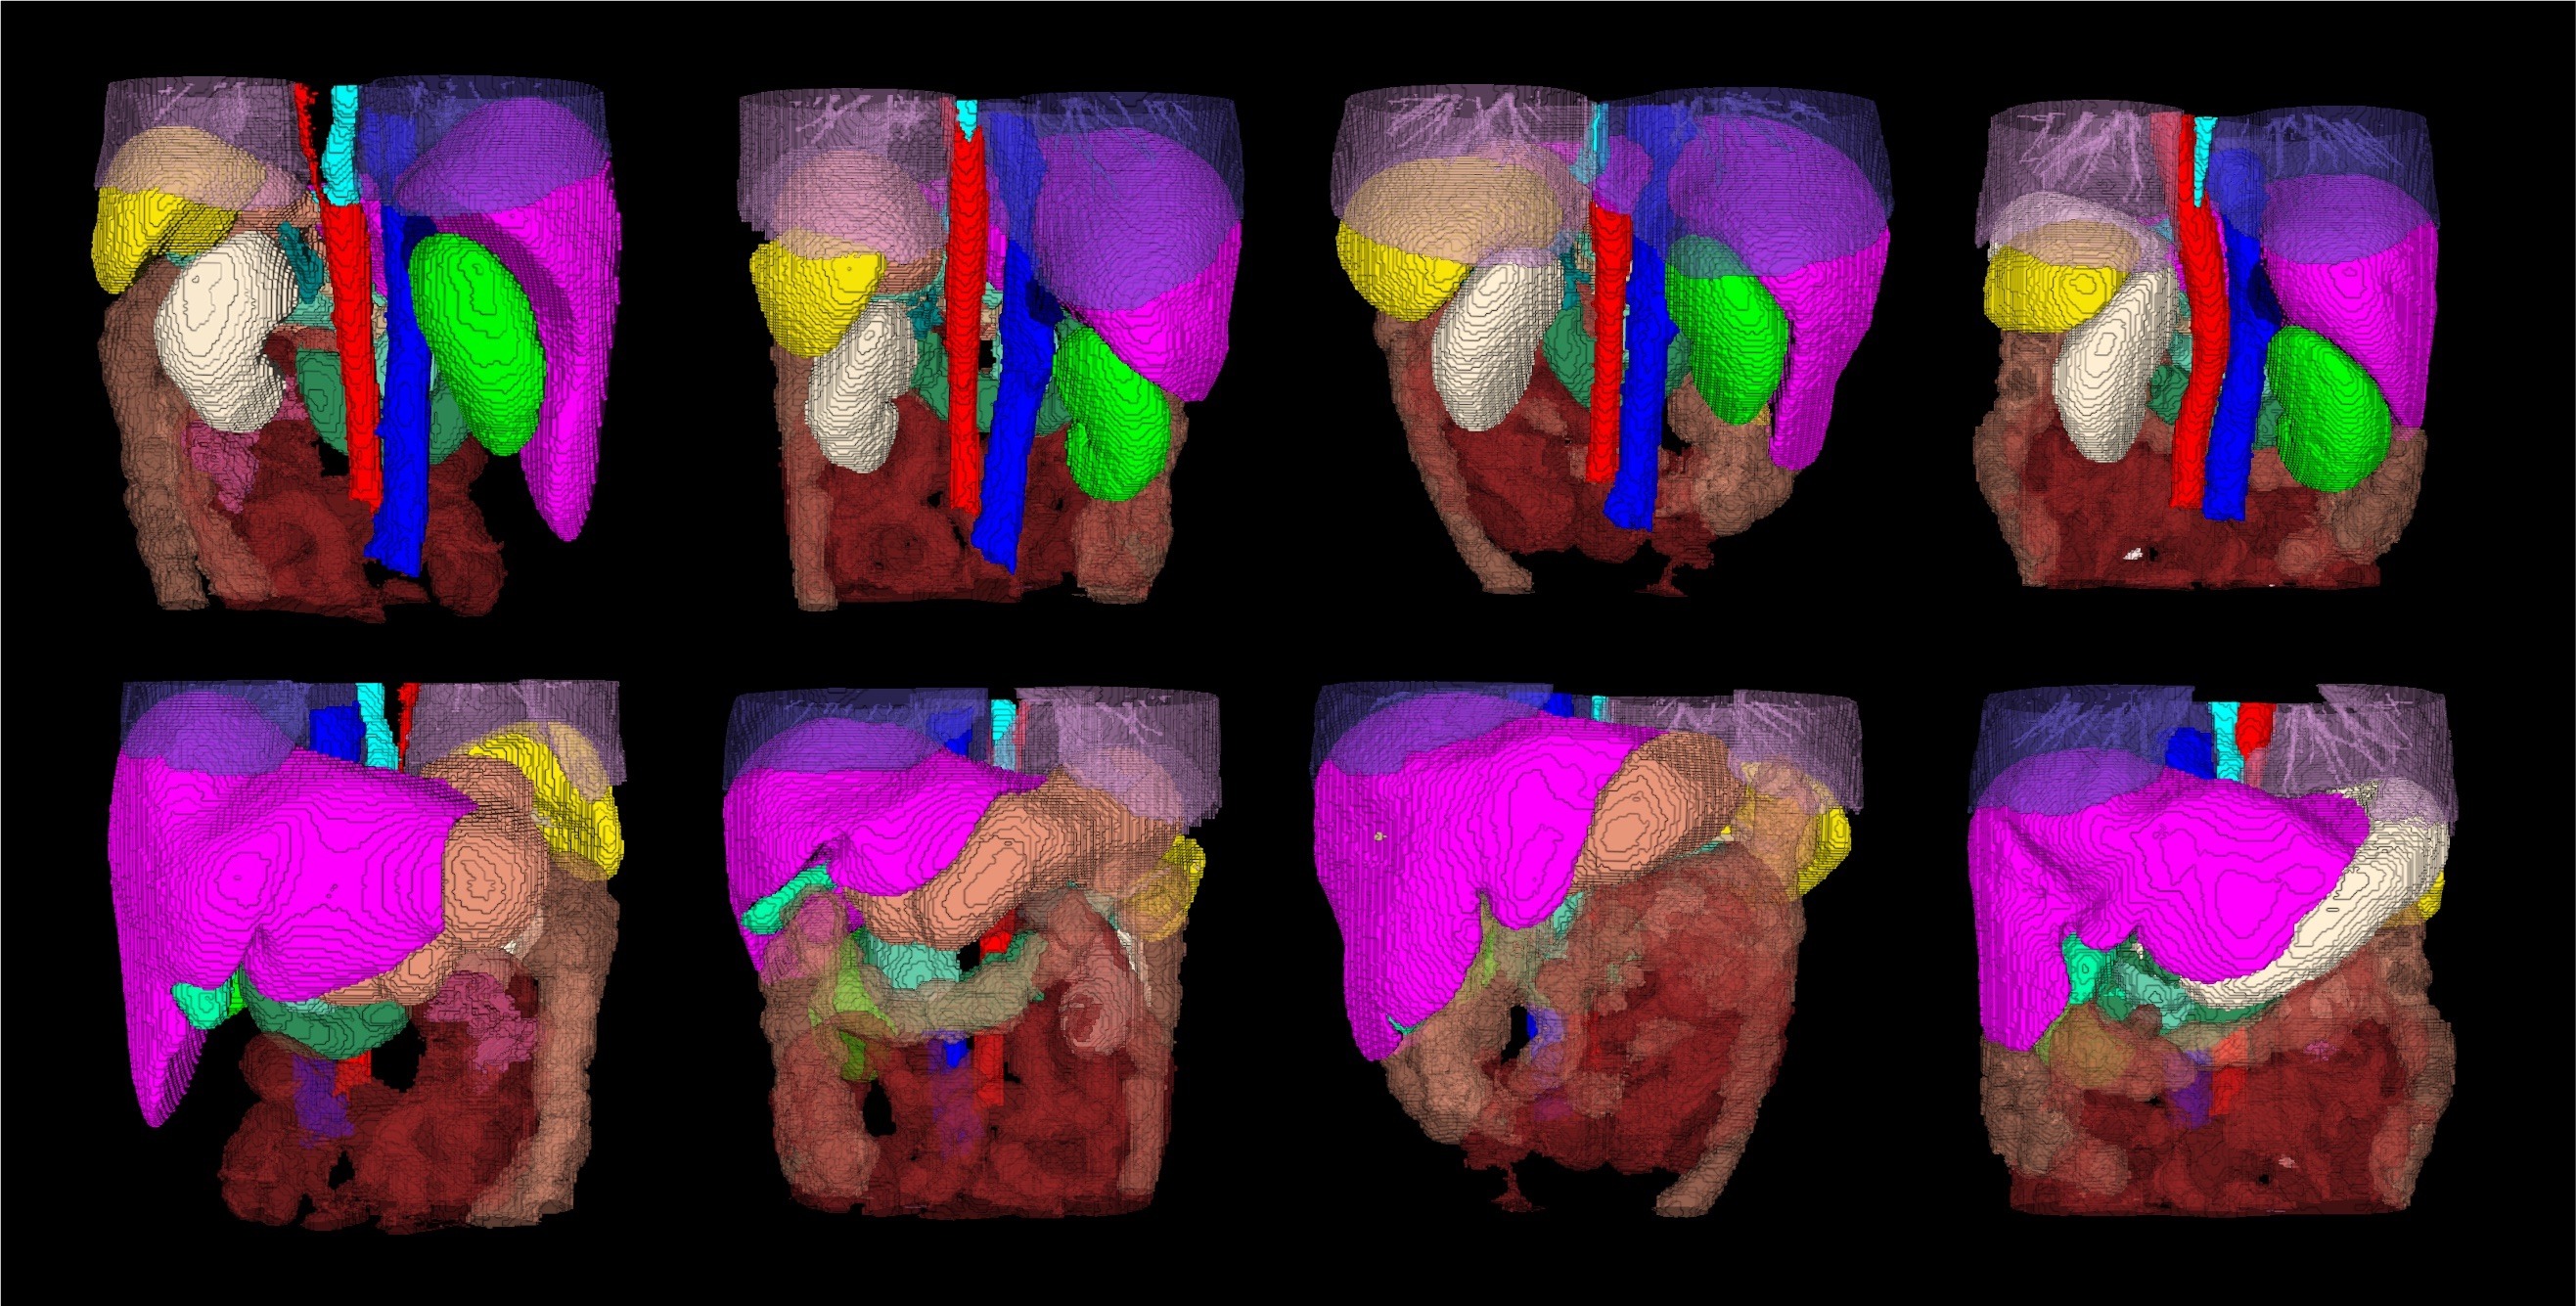 Eight colorful 3D representations of the abdominal organs, viewed from different angle.s